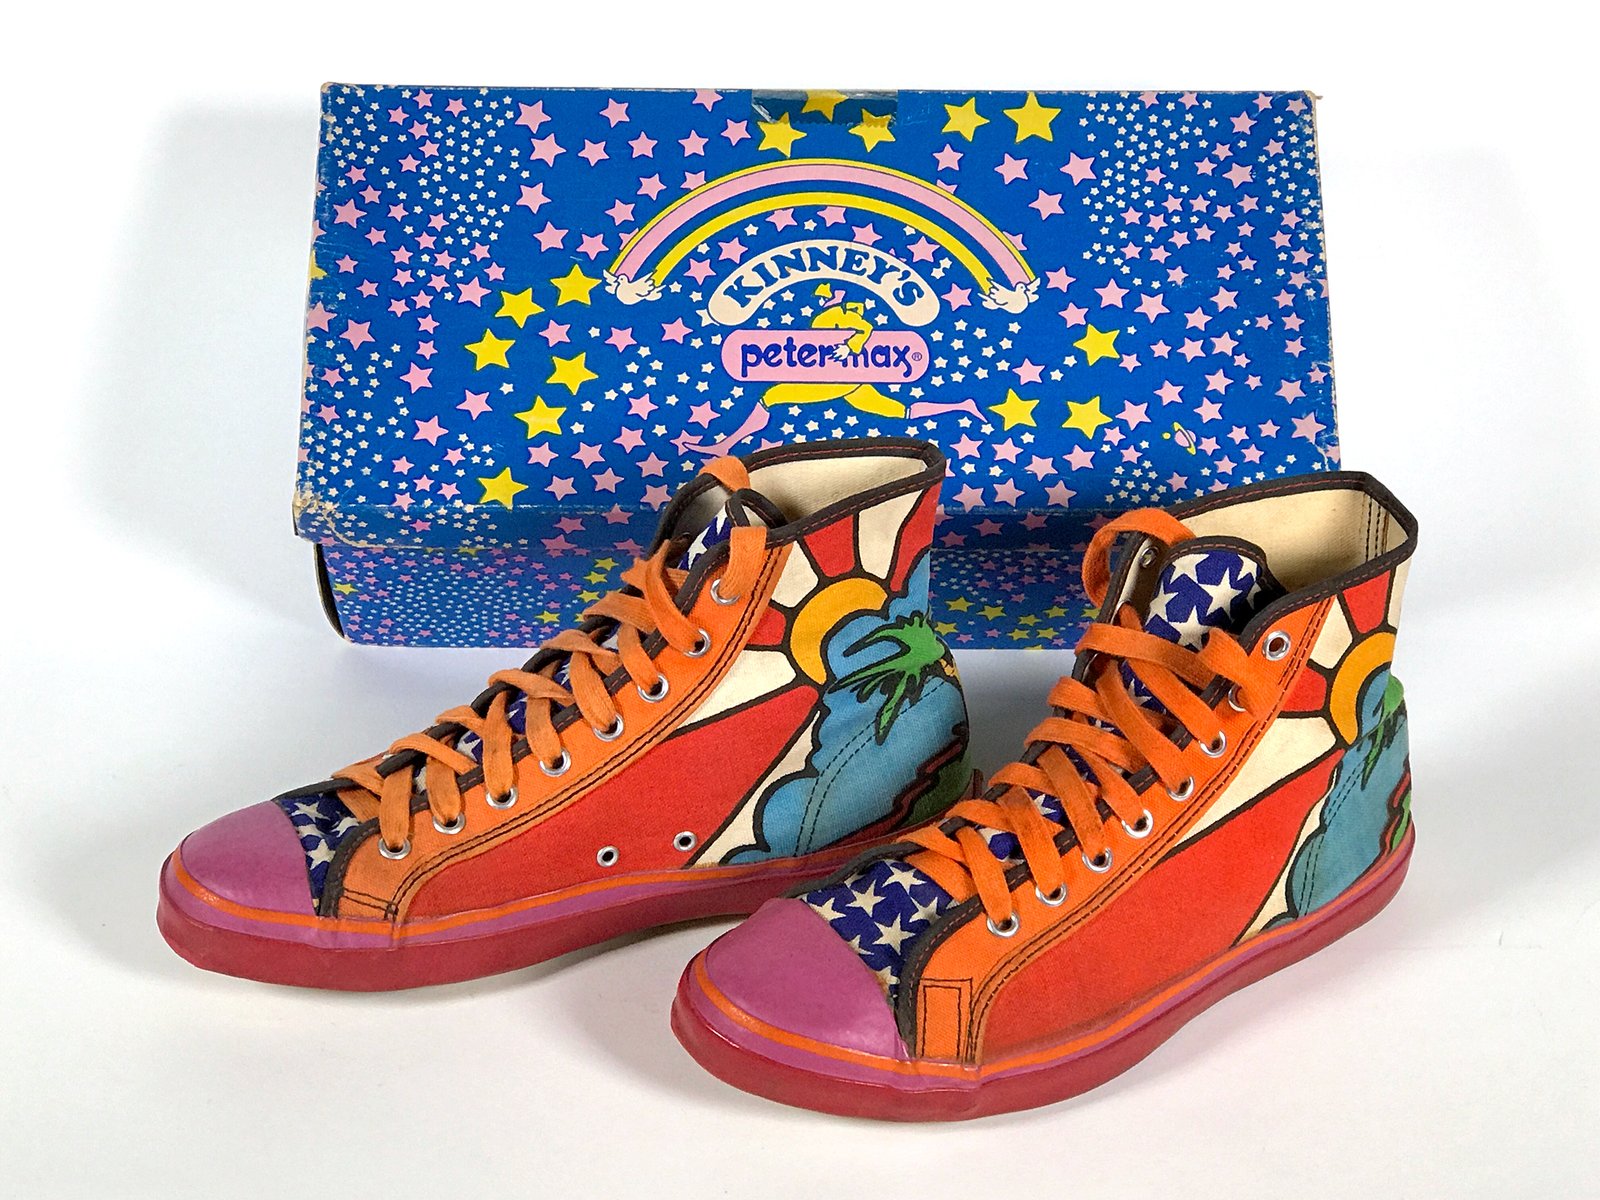 Sneakers designed by Peter Max